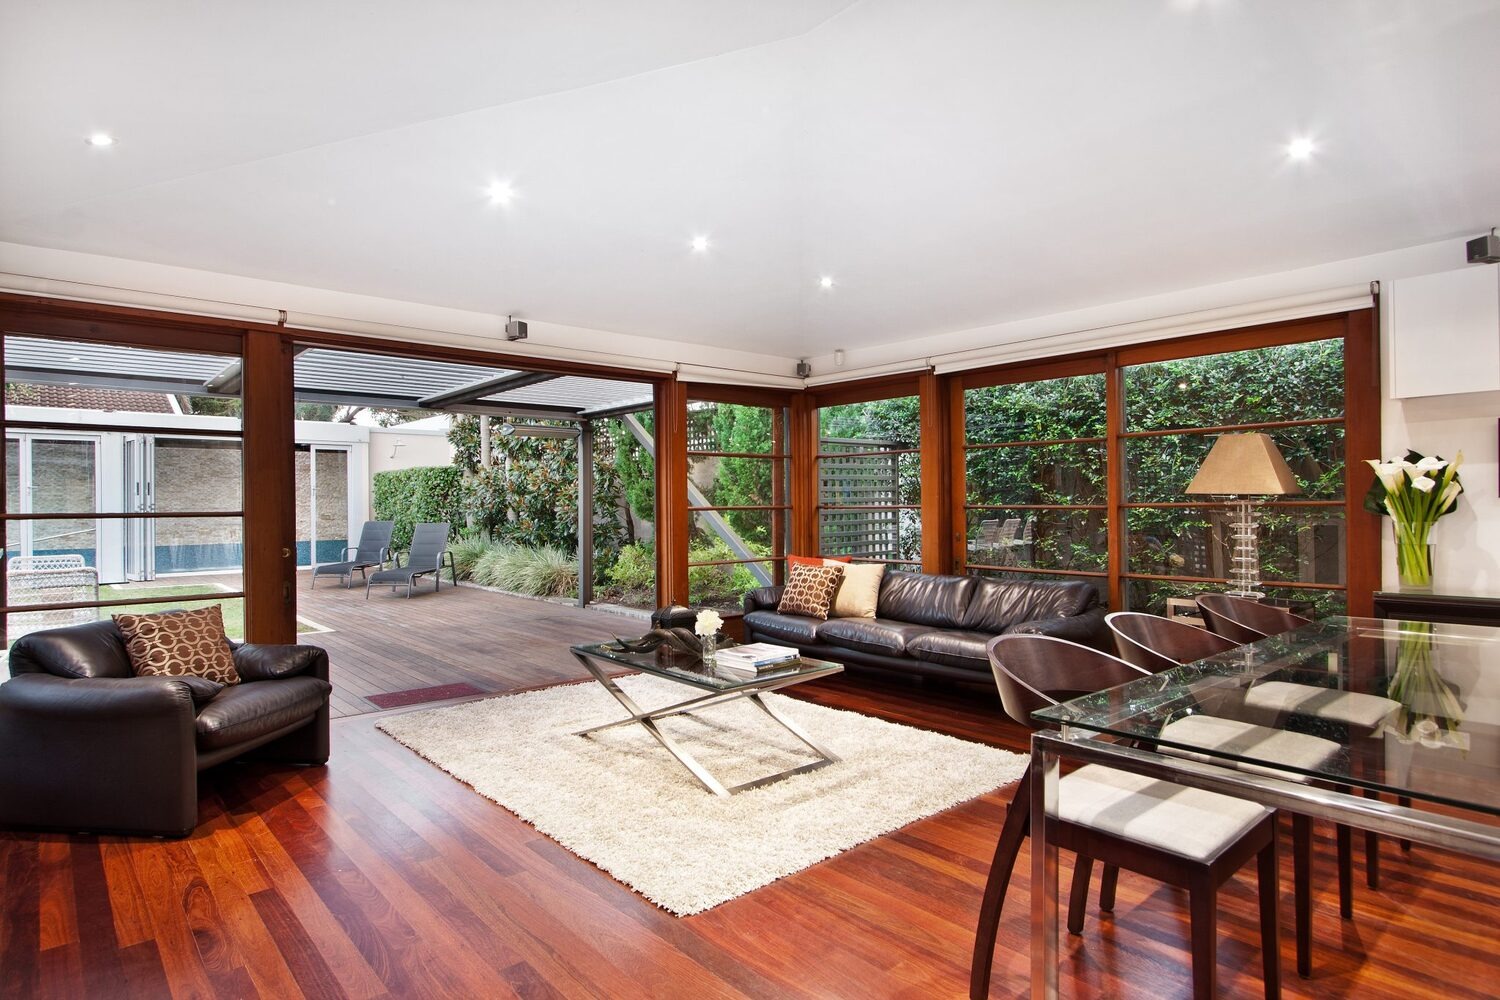 The living room as a part of the home additions Northbrook project included creating an open area that maximizes the garden connection